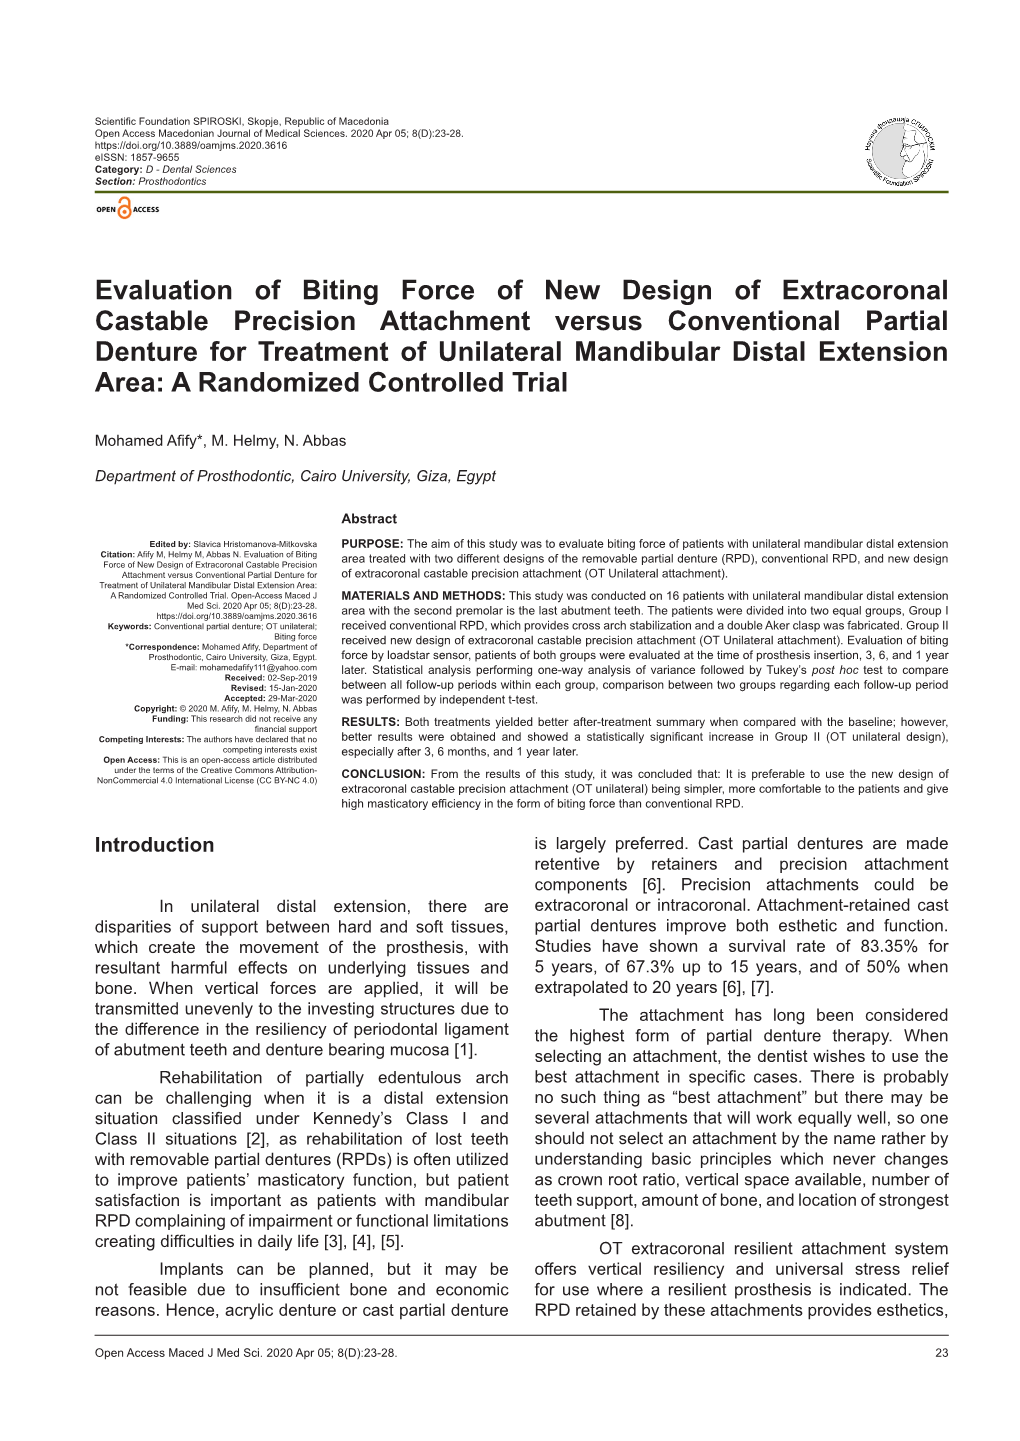 Evaluation of Biting Force of New Design of Extracoronal Castable